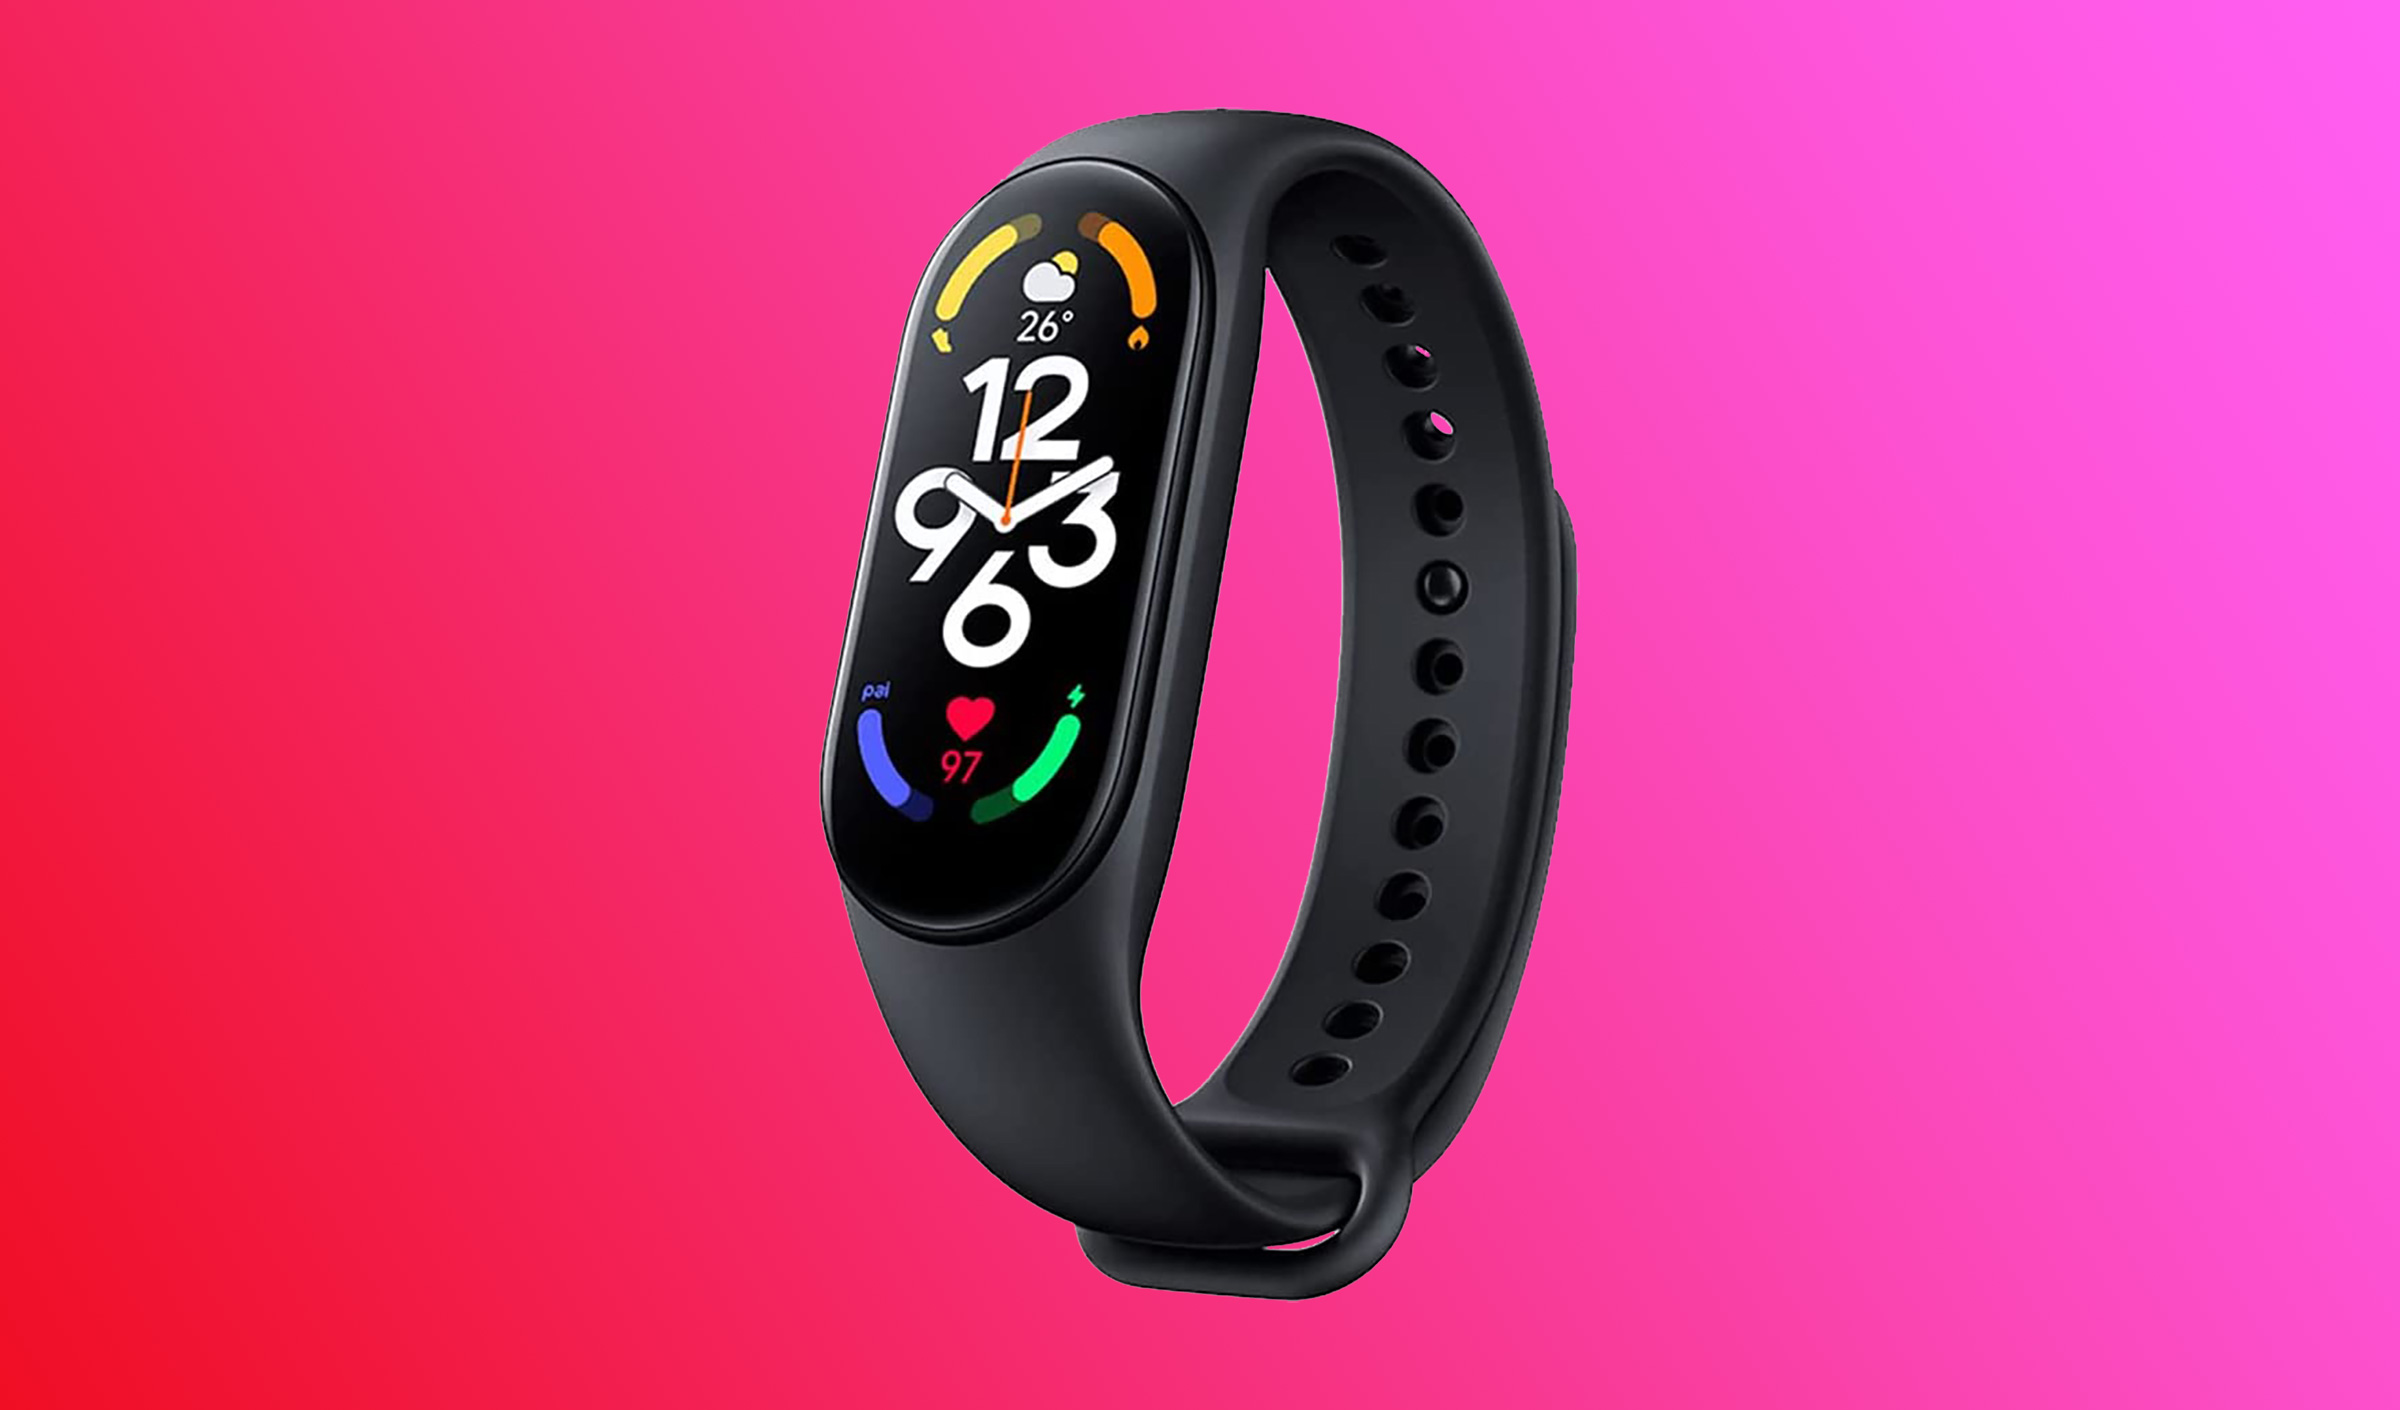 Black Friday deal: This $50 band can replace a $500 Apple Watch